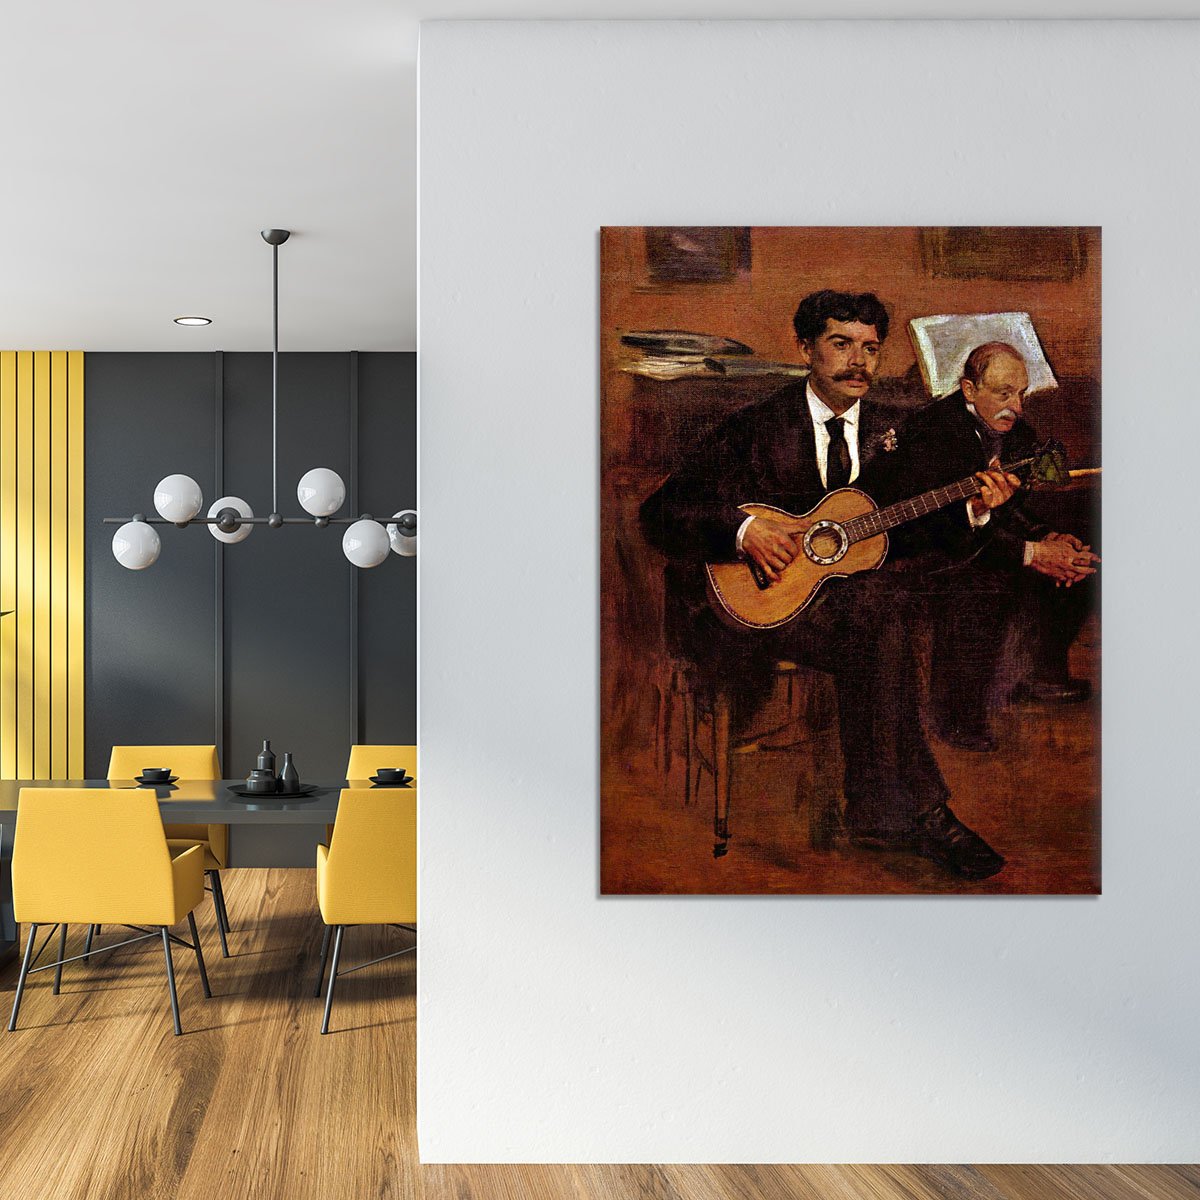 The guitarist Pagans and Monsieur Degas by Degas Canvas Print or Poster